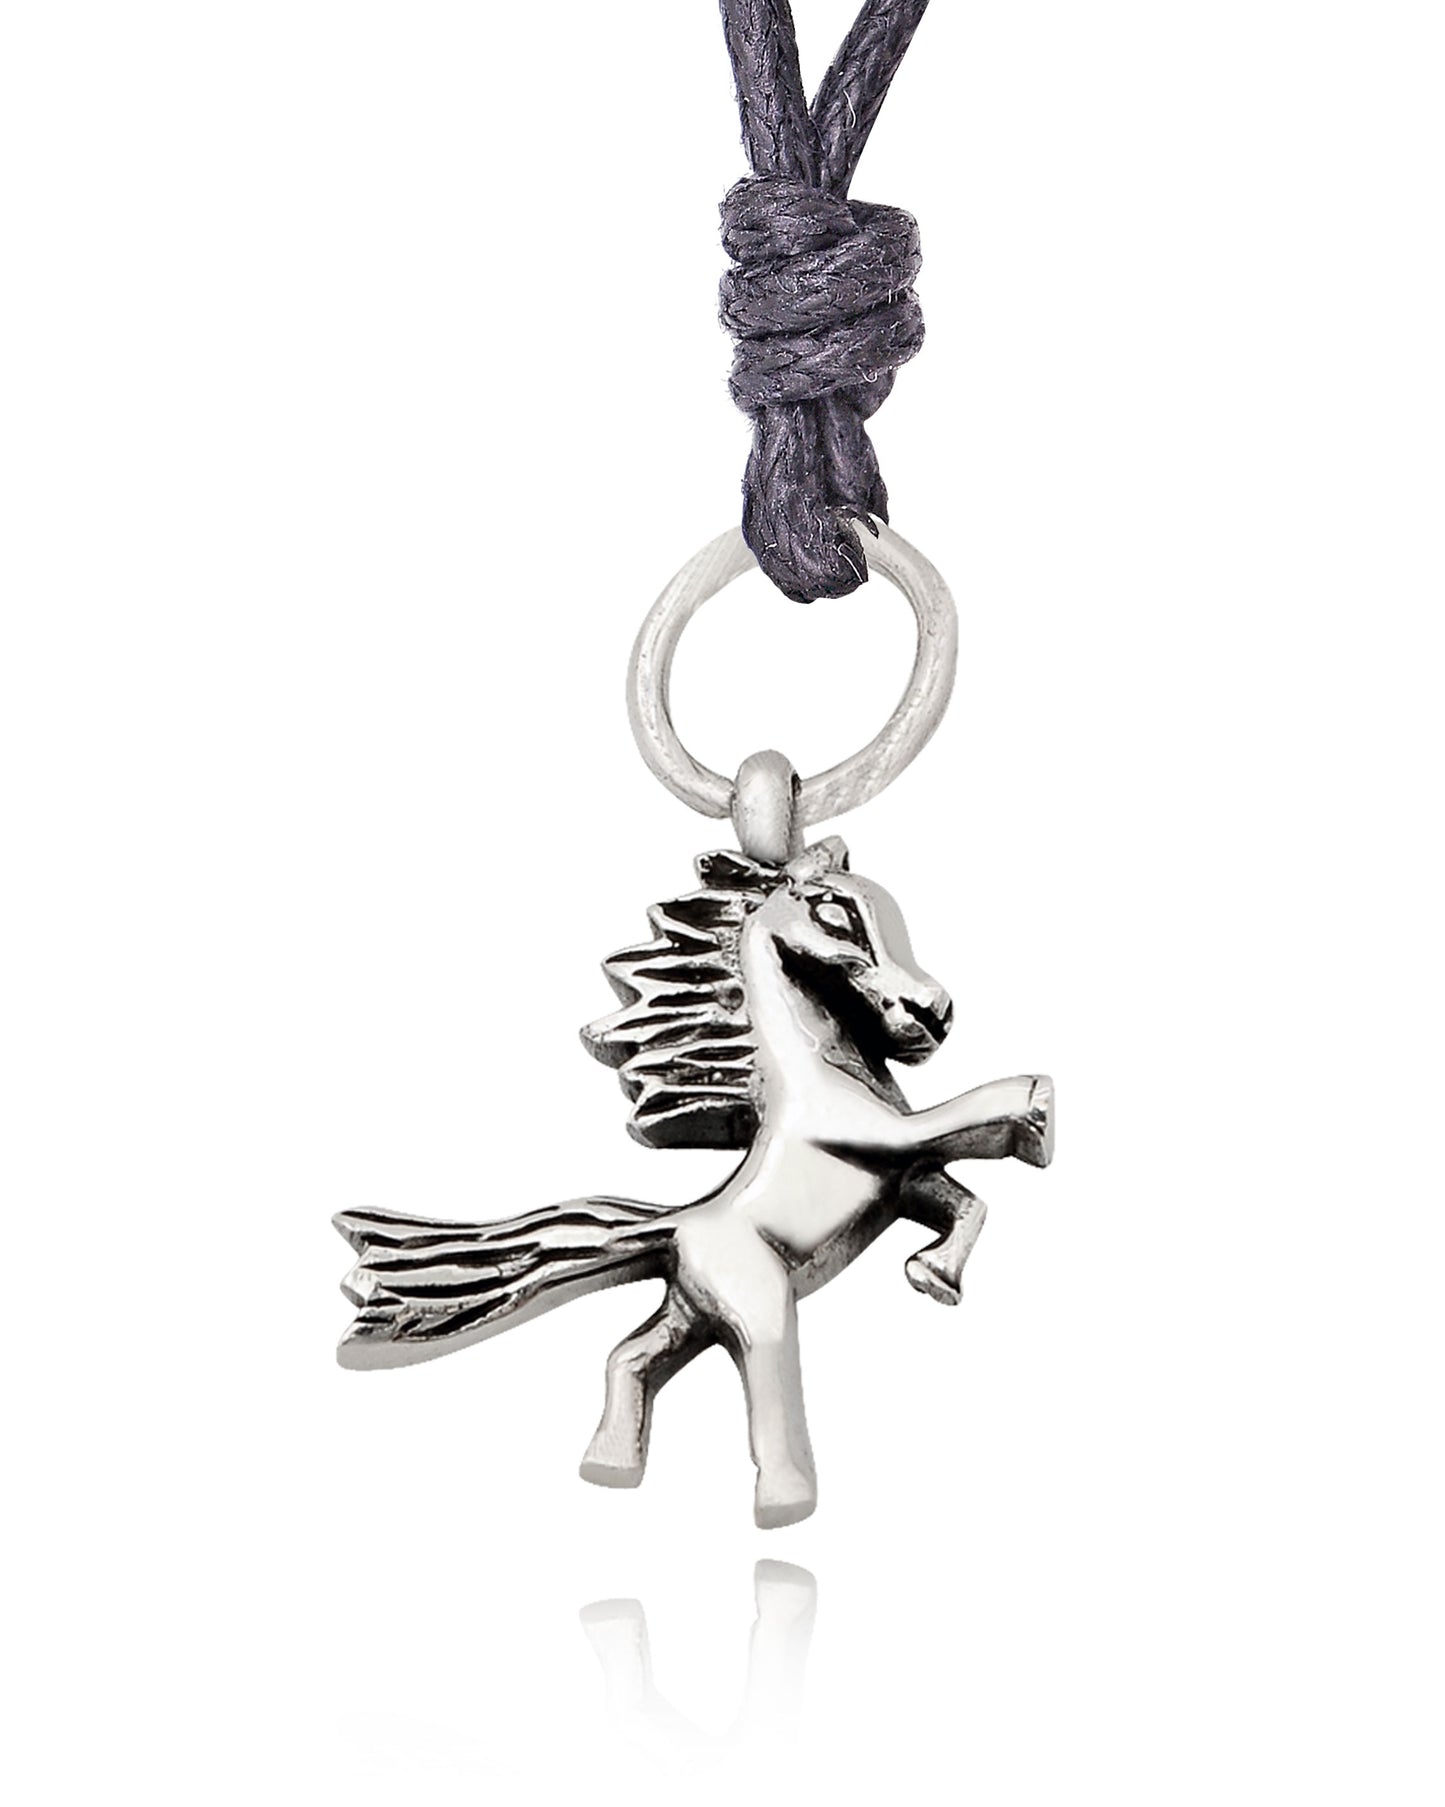 Horse Wild Stallion 92.5 Sterling Silver Pewter Charm Necklace Pendant Jewelry